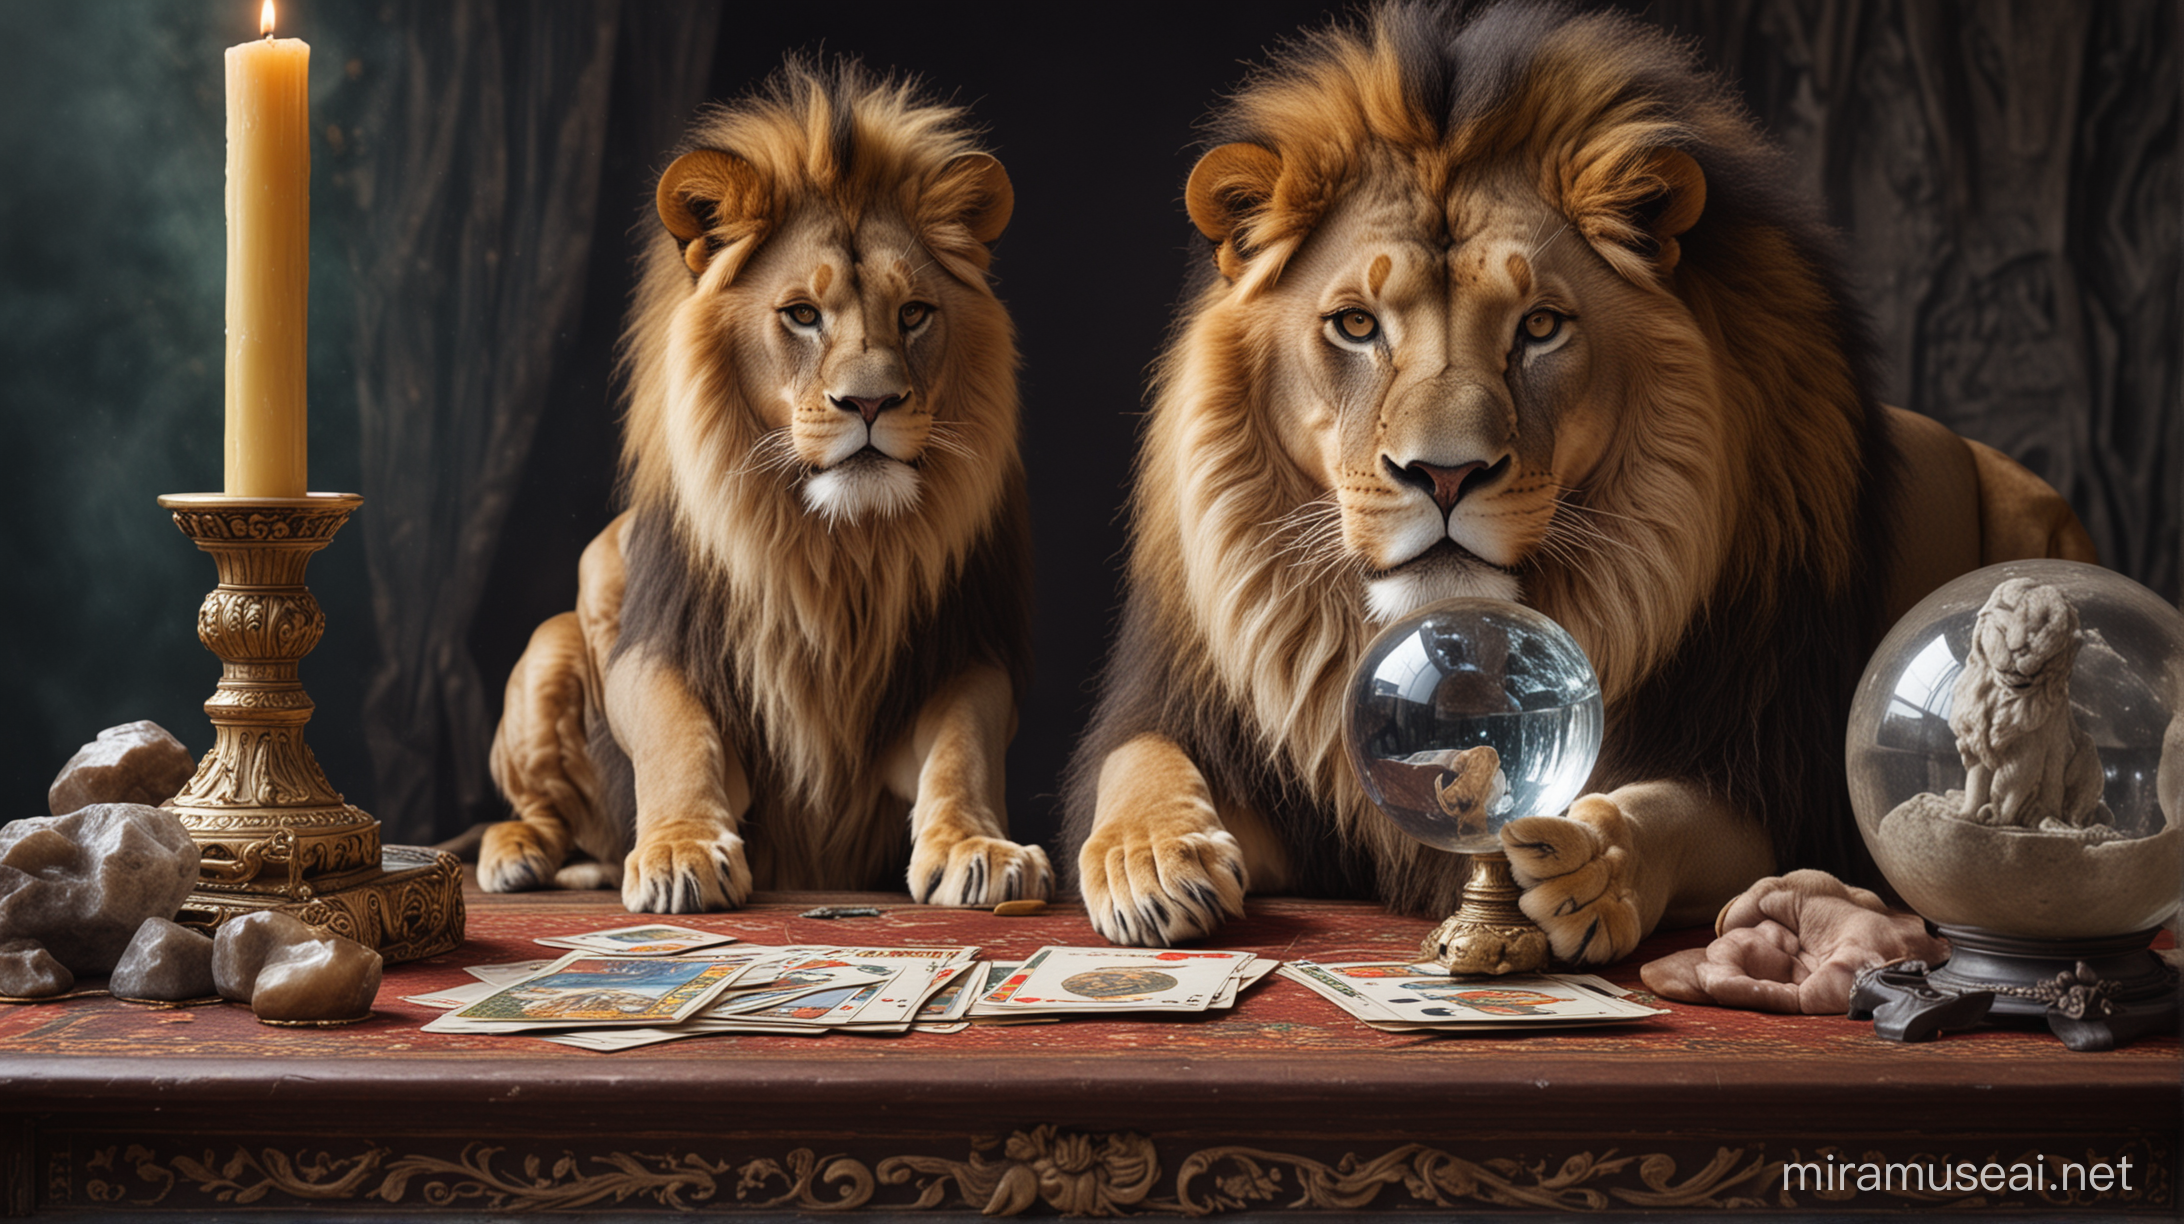 Majestic Lion Tarot Reading with Crystal Ball